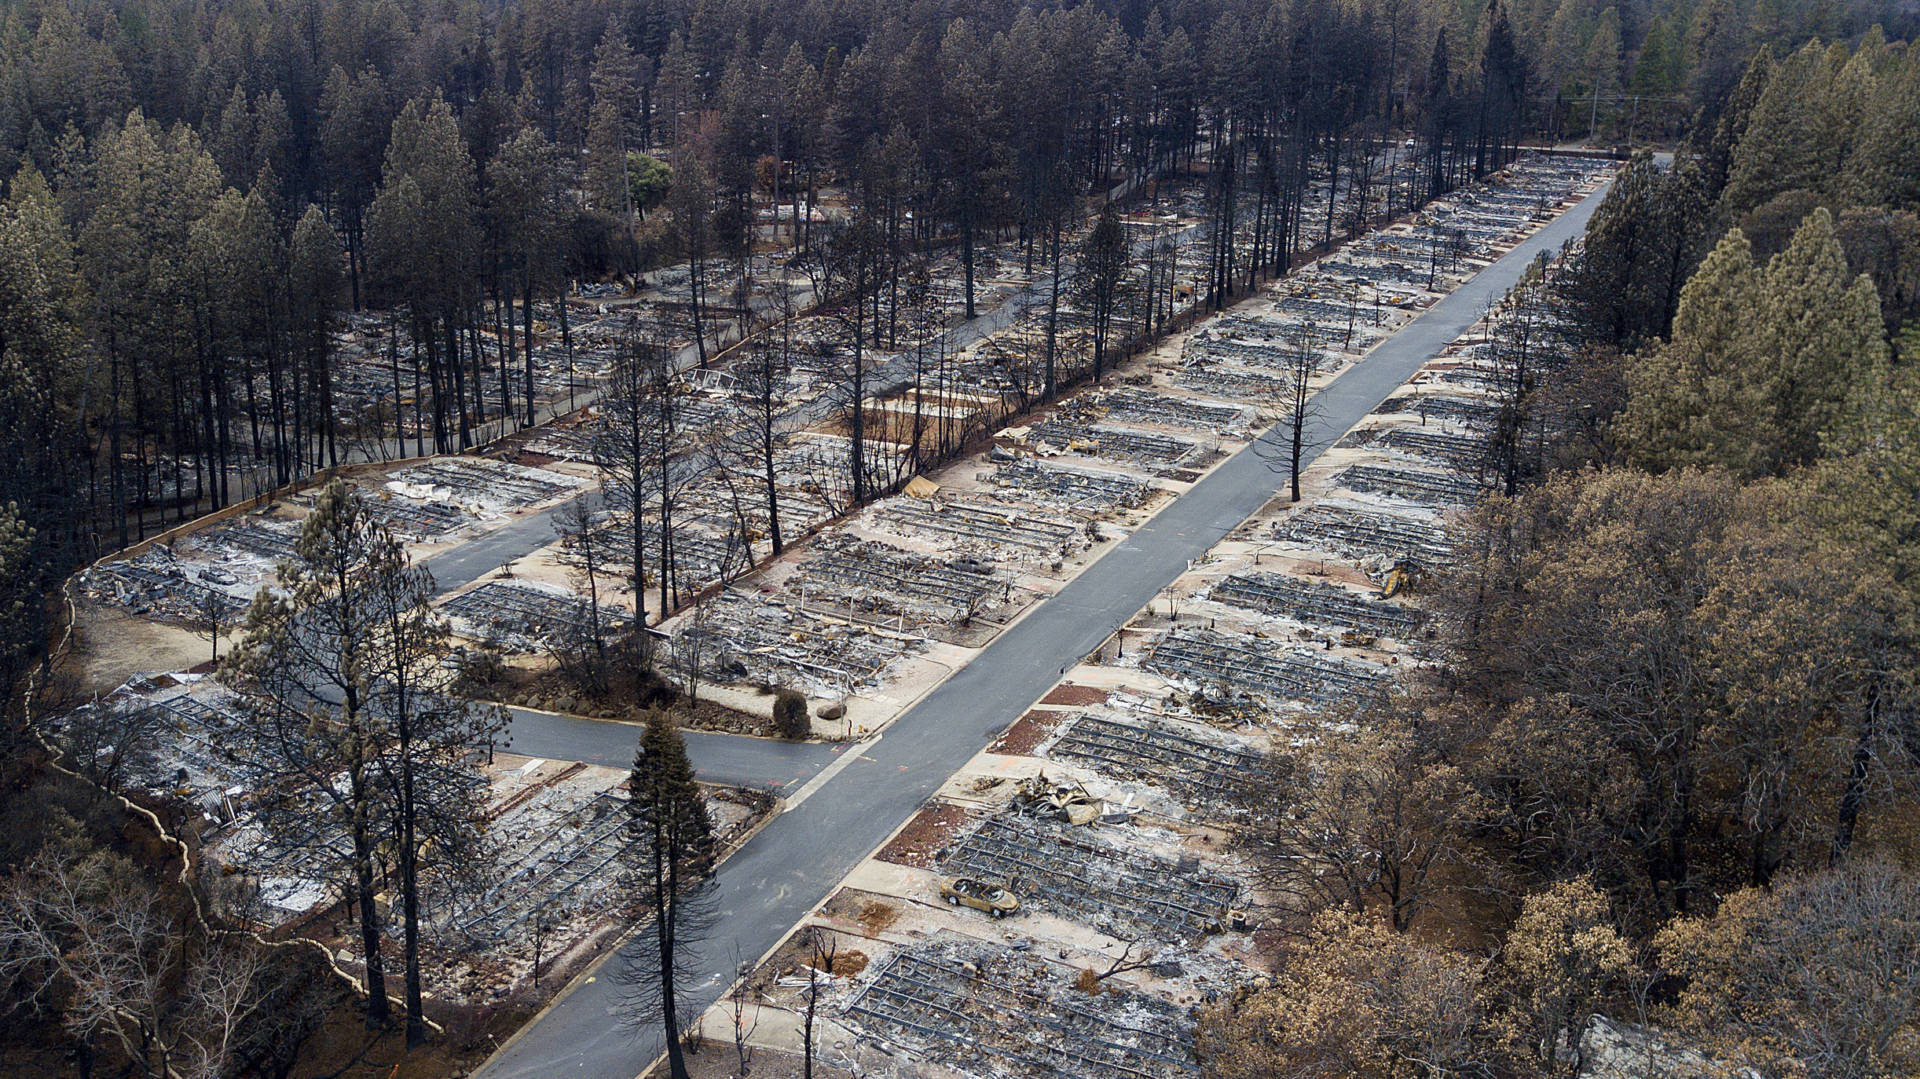 The remains of a mobile home park in Paradise burned by the November 2018 Camp Fire.  Noah Berger/AP